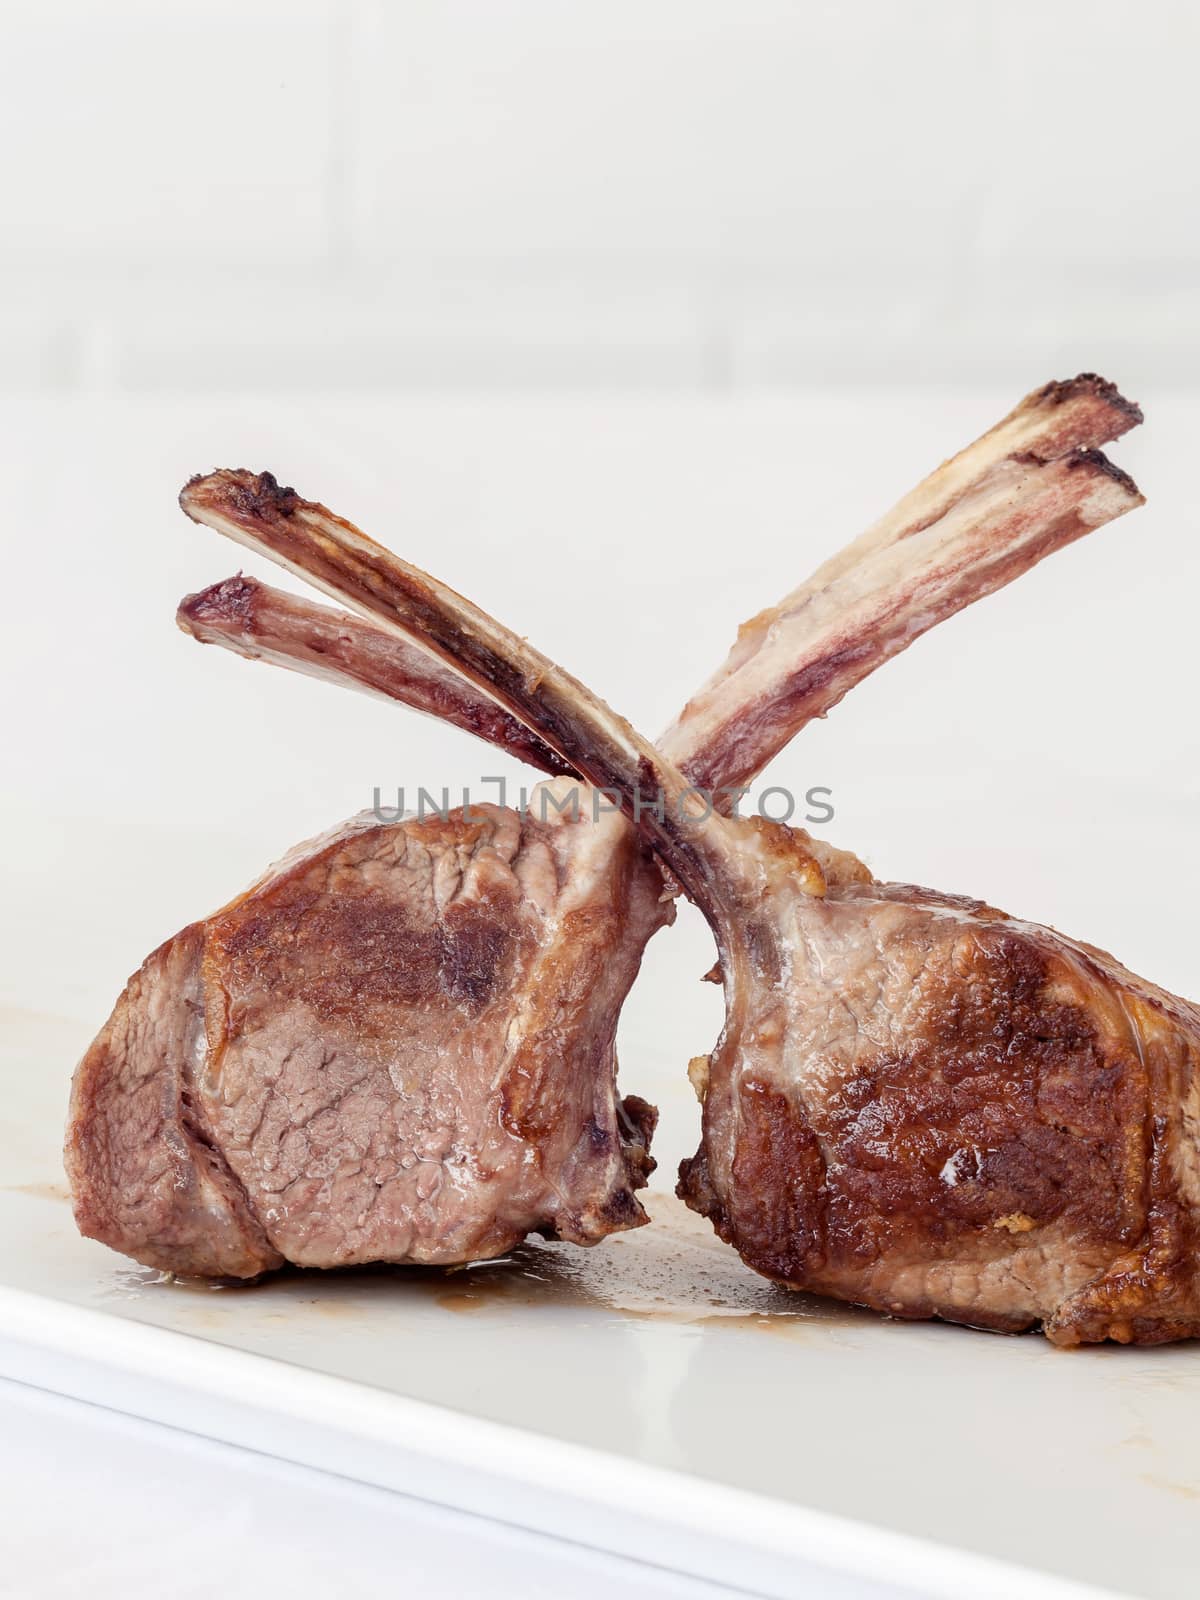 Roasted Lamb Chops on white background. by kerdkanno